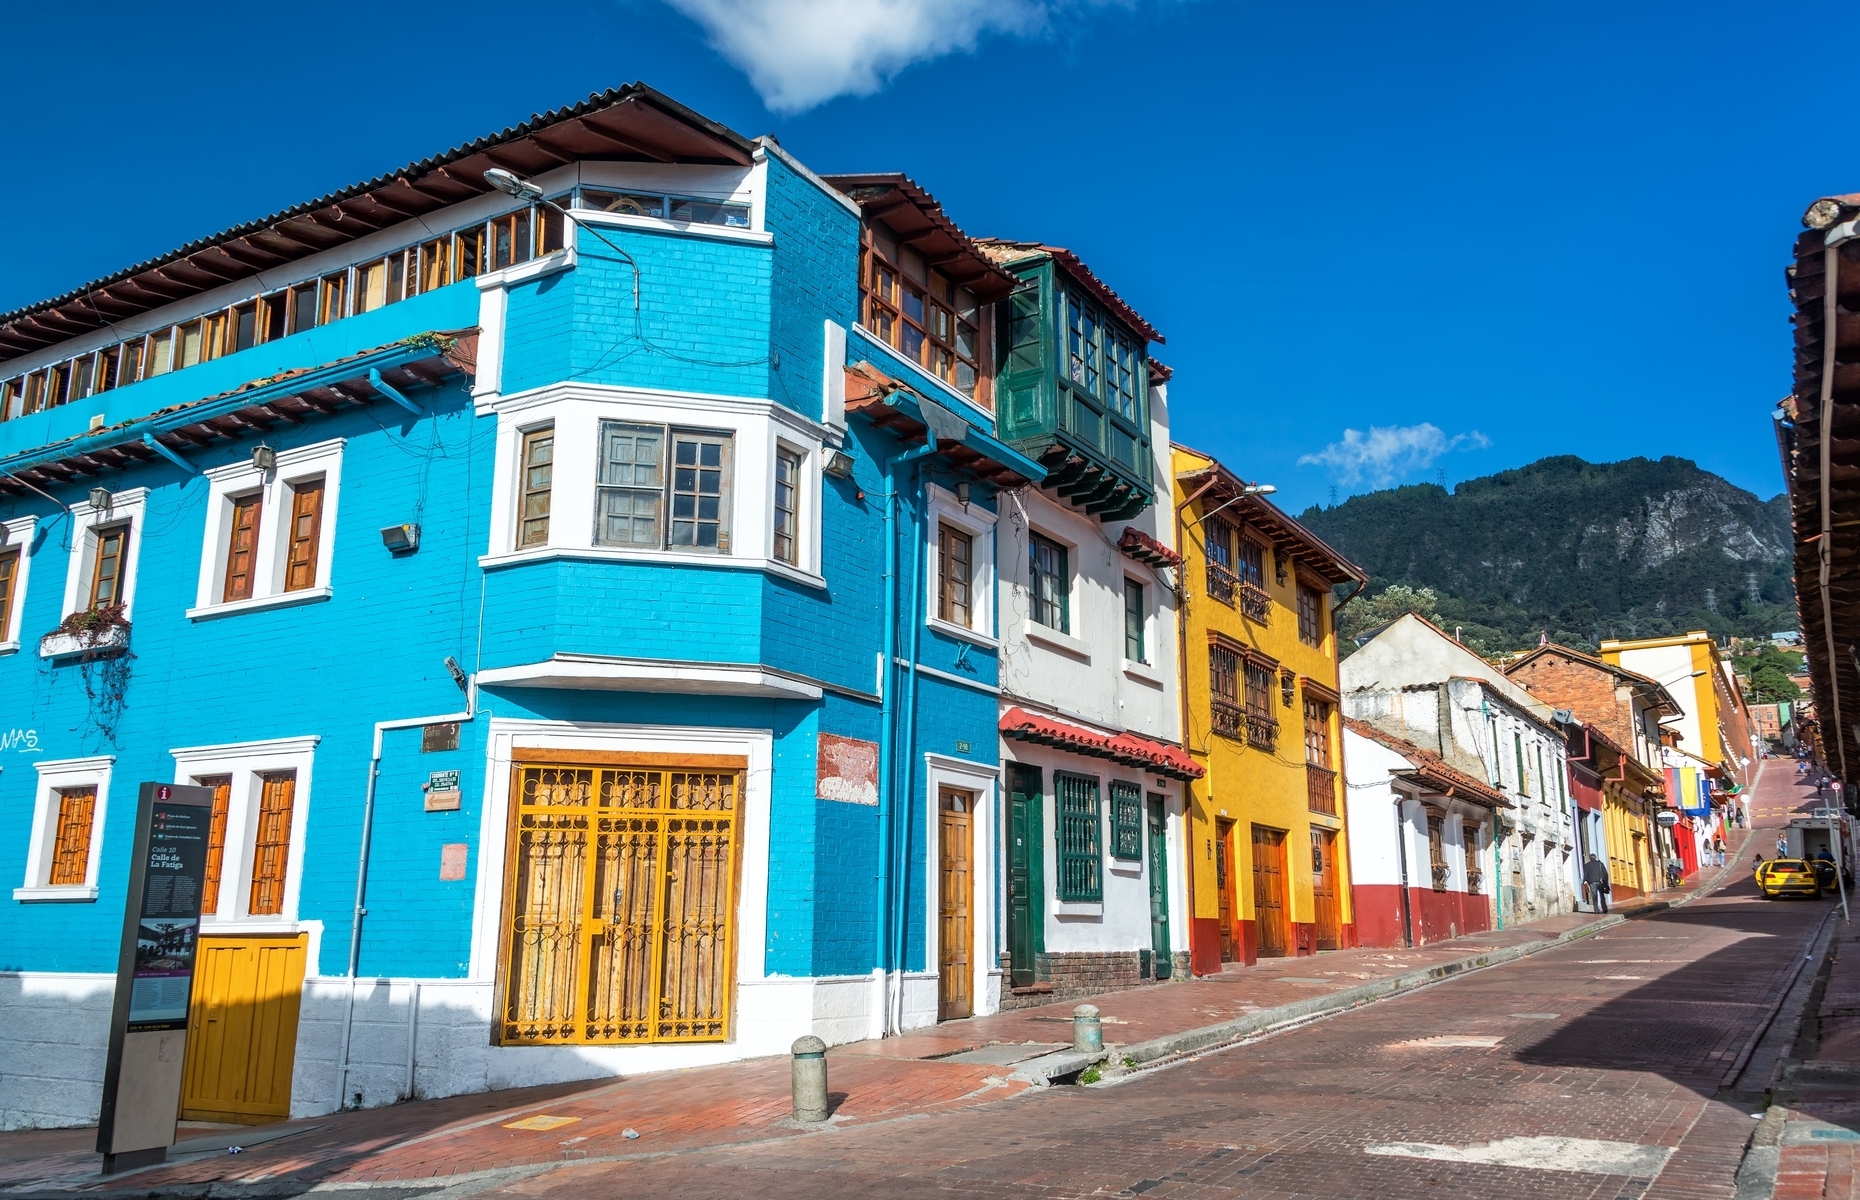 The capital of Colombia, <a href="https://colombia.travel/en/bogota" rel="noreferrer noopener">Bogotá</a> is a bustling city that has retained its historical charm. A visit to the country’s largest city wouldn’t be complete without a trip to the Plaza de Bolívar and the Teatro Colón, not to mention its many museums, including the Botero Museum, the National Museum of Colombia, and the Gold Museum.